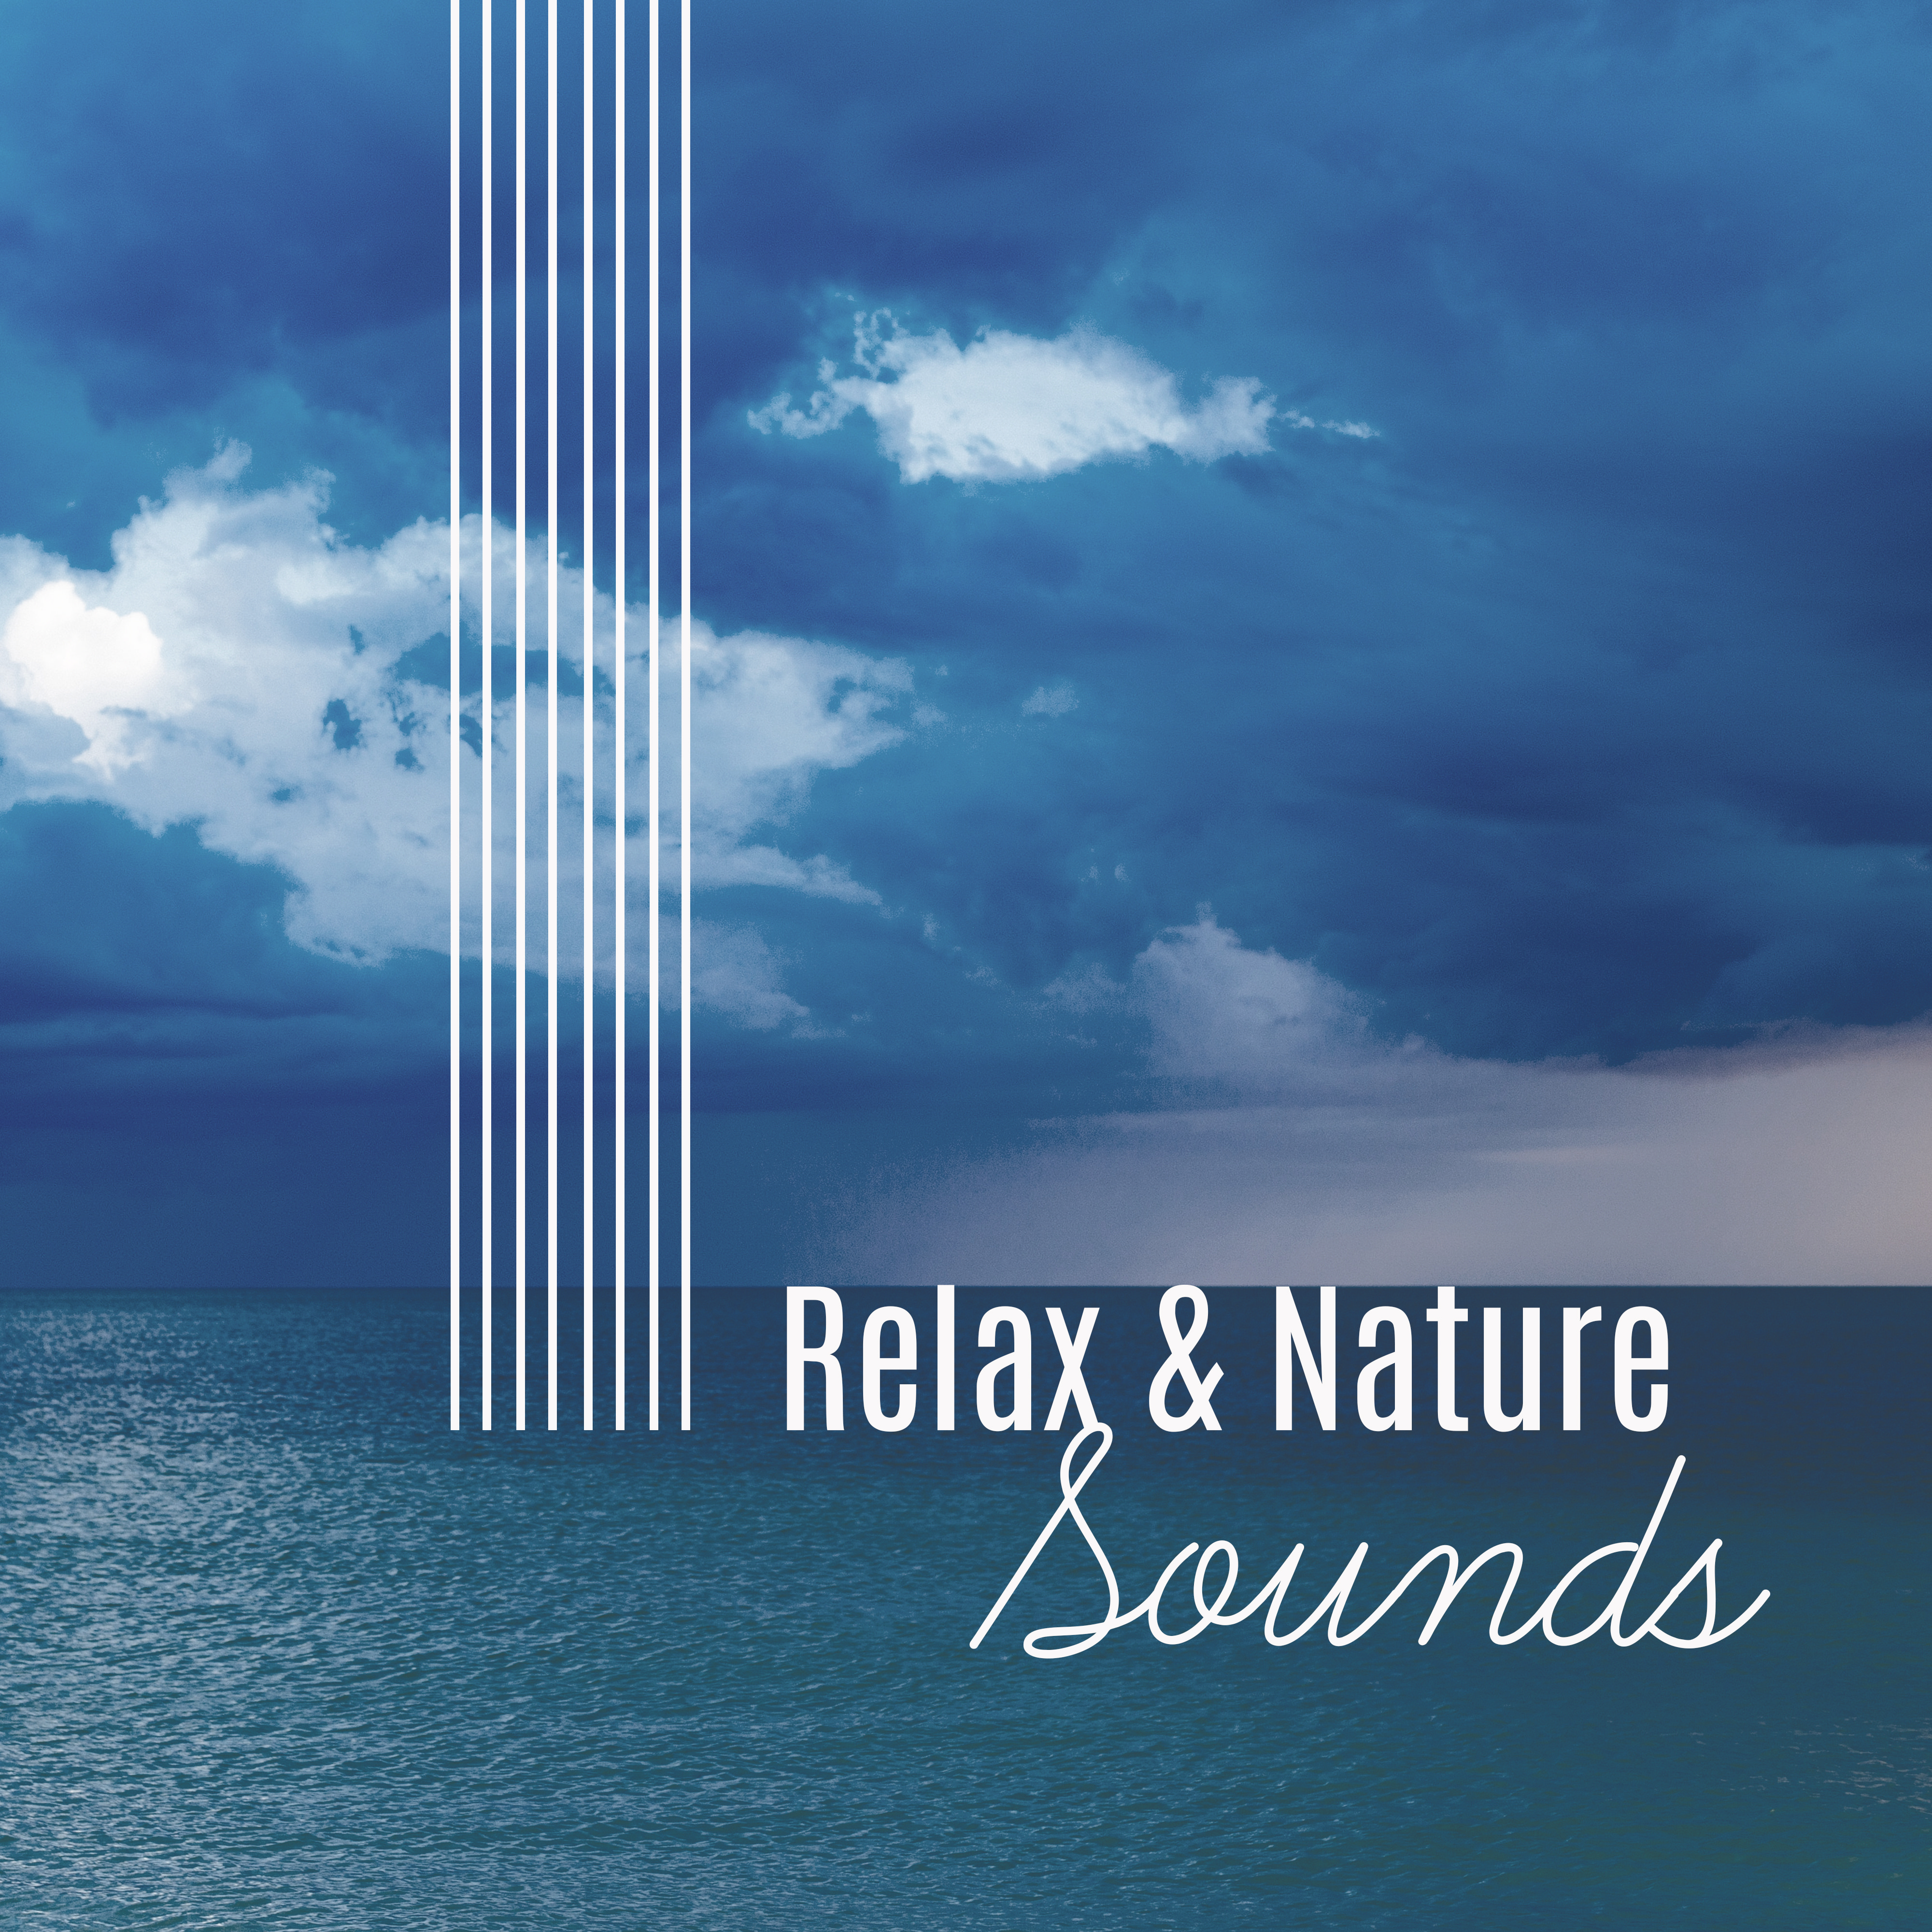 Relax  Nature Sounds  Peaceful Music for Relaxation, Sounds of Sea, Forest Music, Soothing Water, Deep Sleep, Meditation, Gentle Melodies